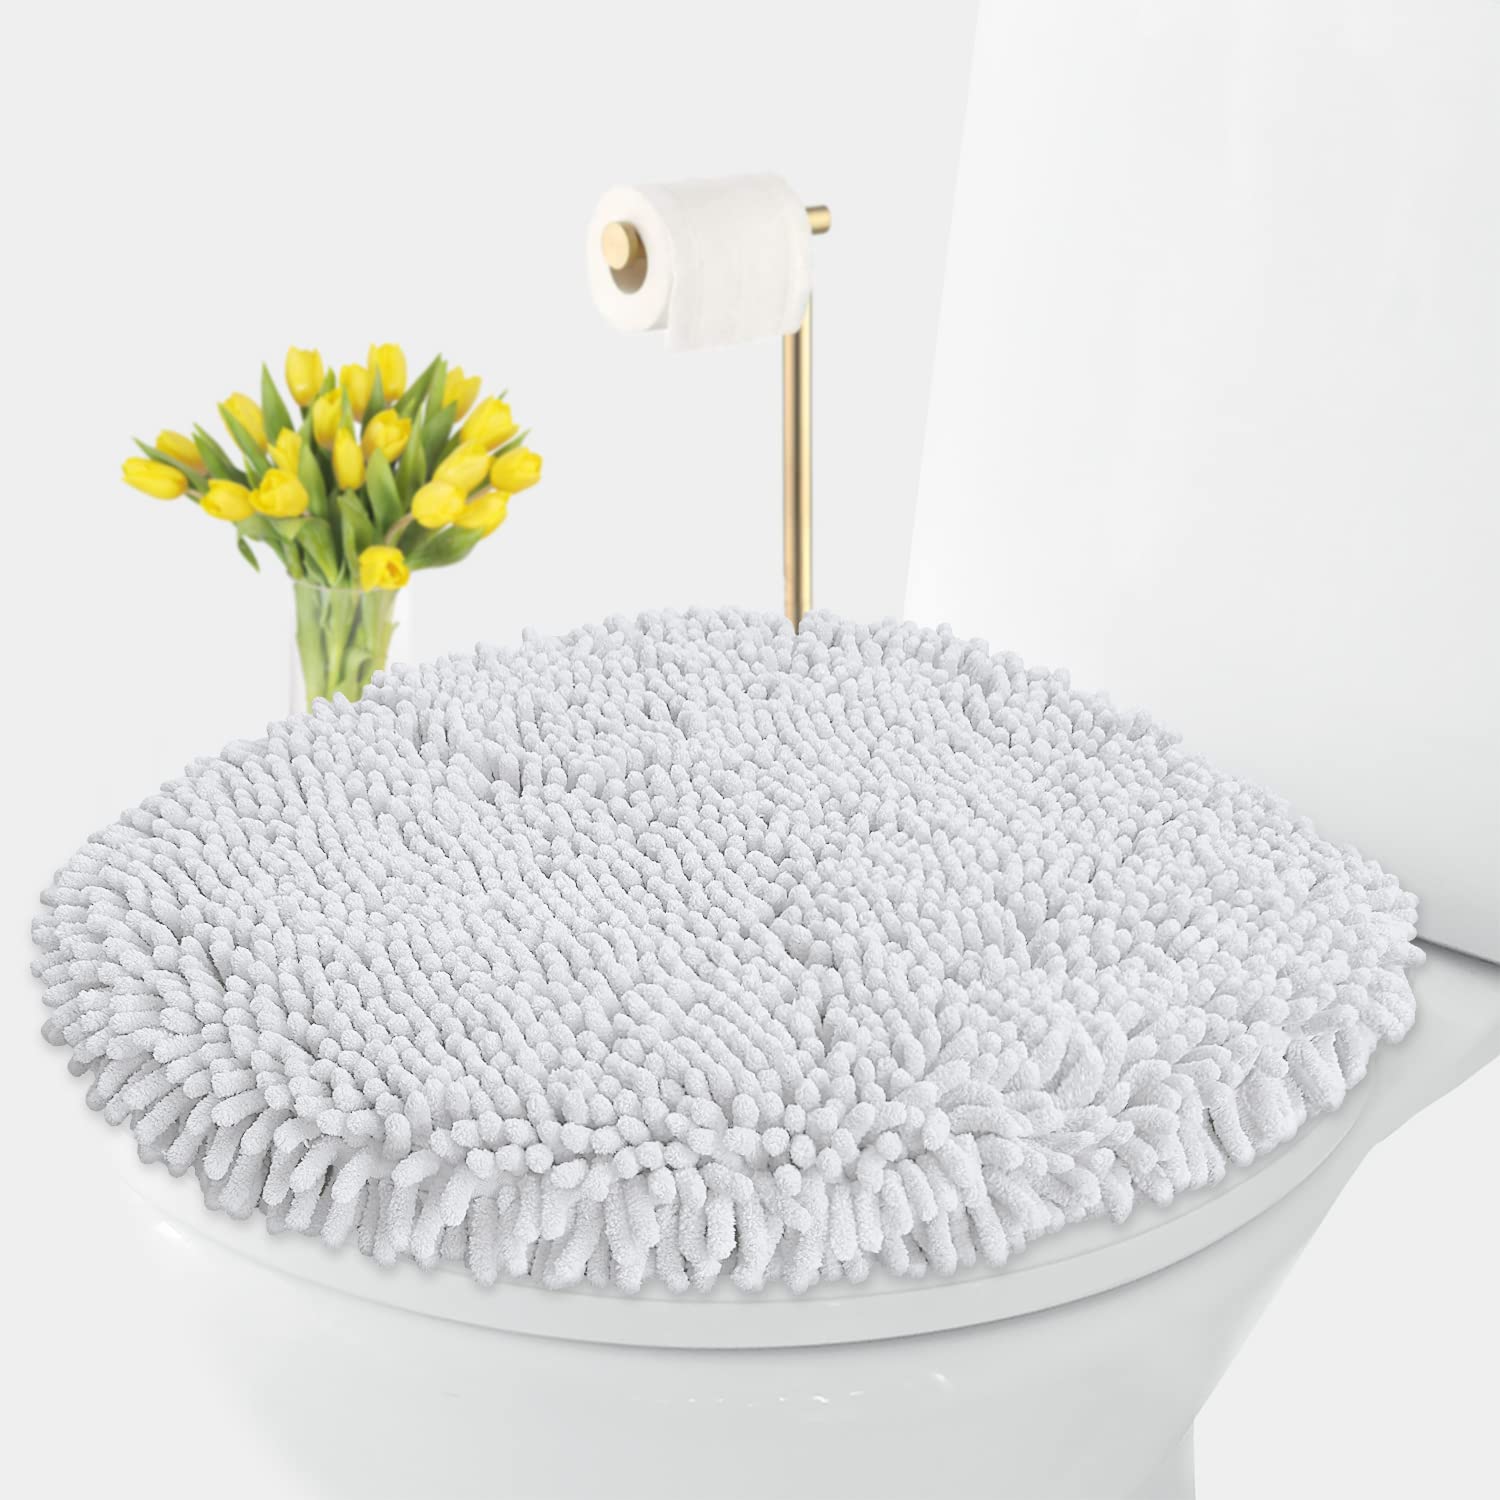 LuxUrux Toilet Lid Cover, Extra-Soft Plush Seat Cloud Washable Shaggy Microfiber Standard Toilet Lid Covers for Bathroom Machine Wash & Dry.  - Very Good